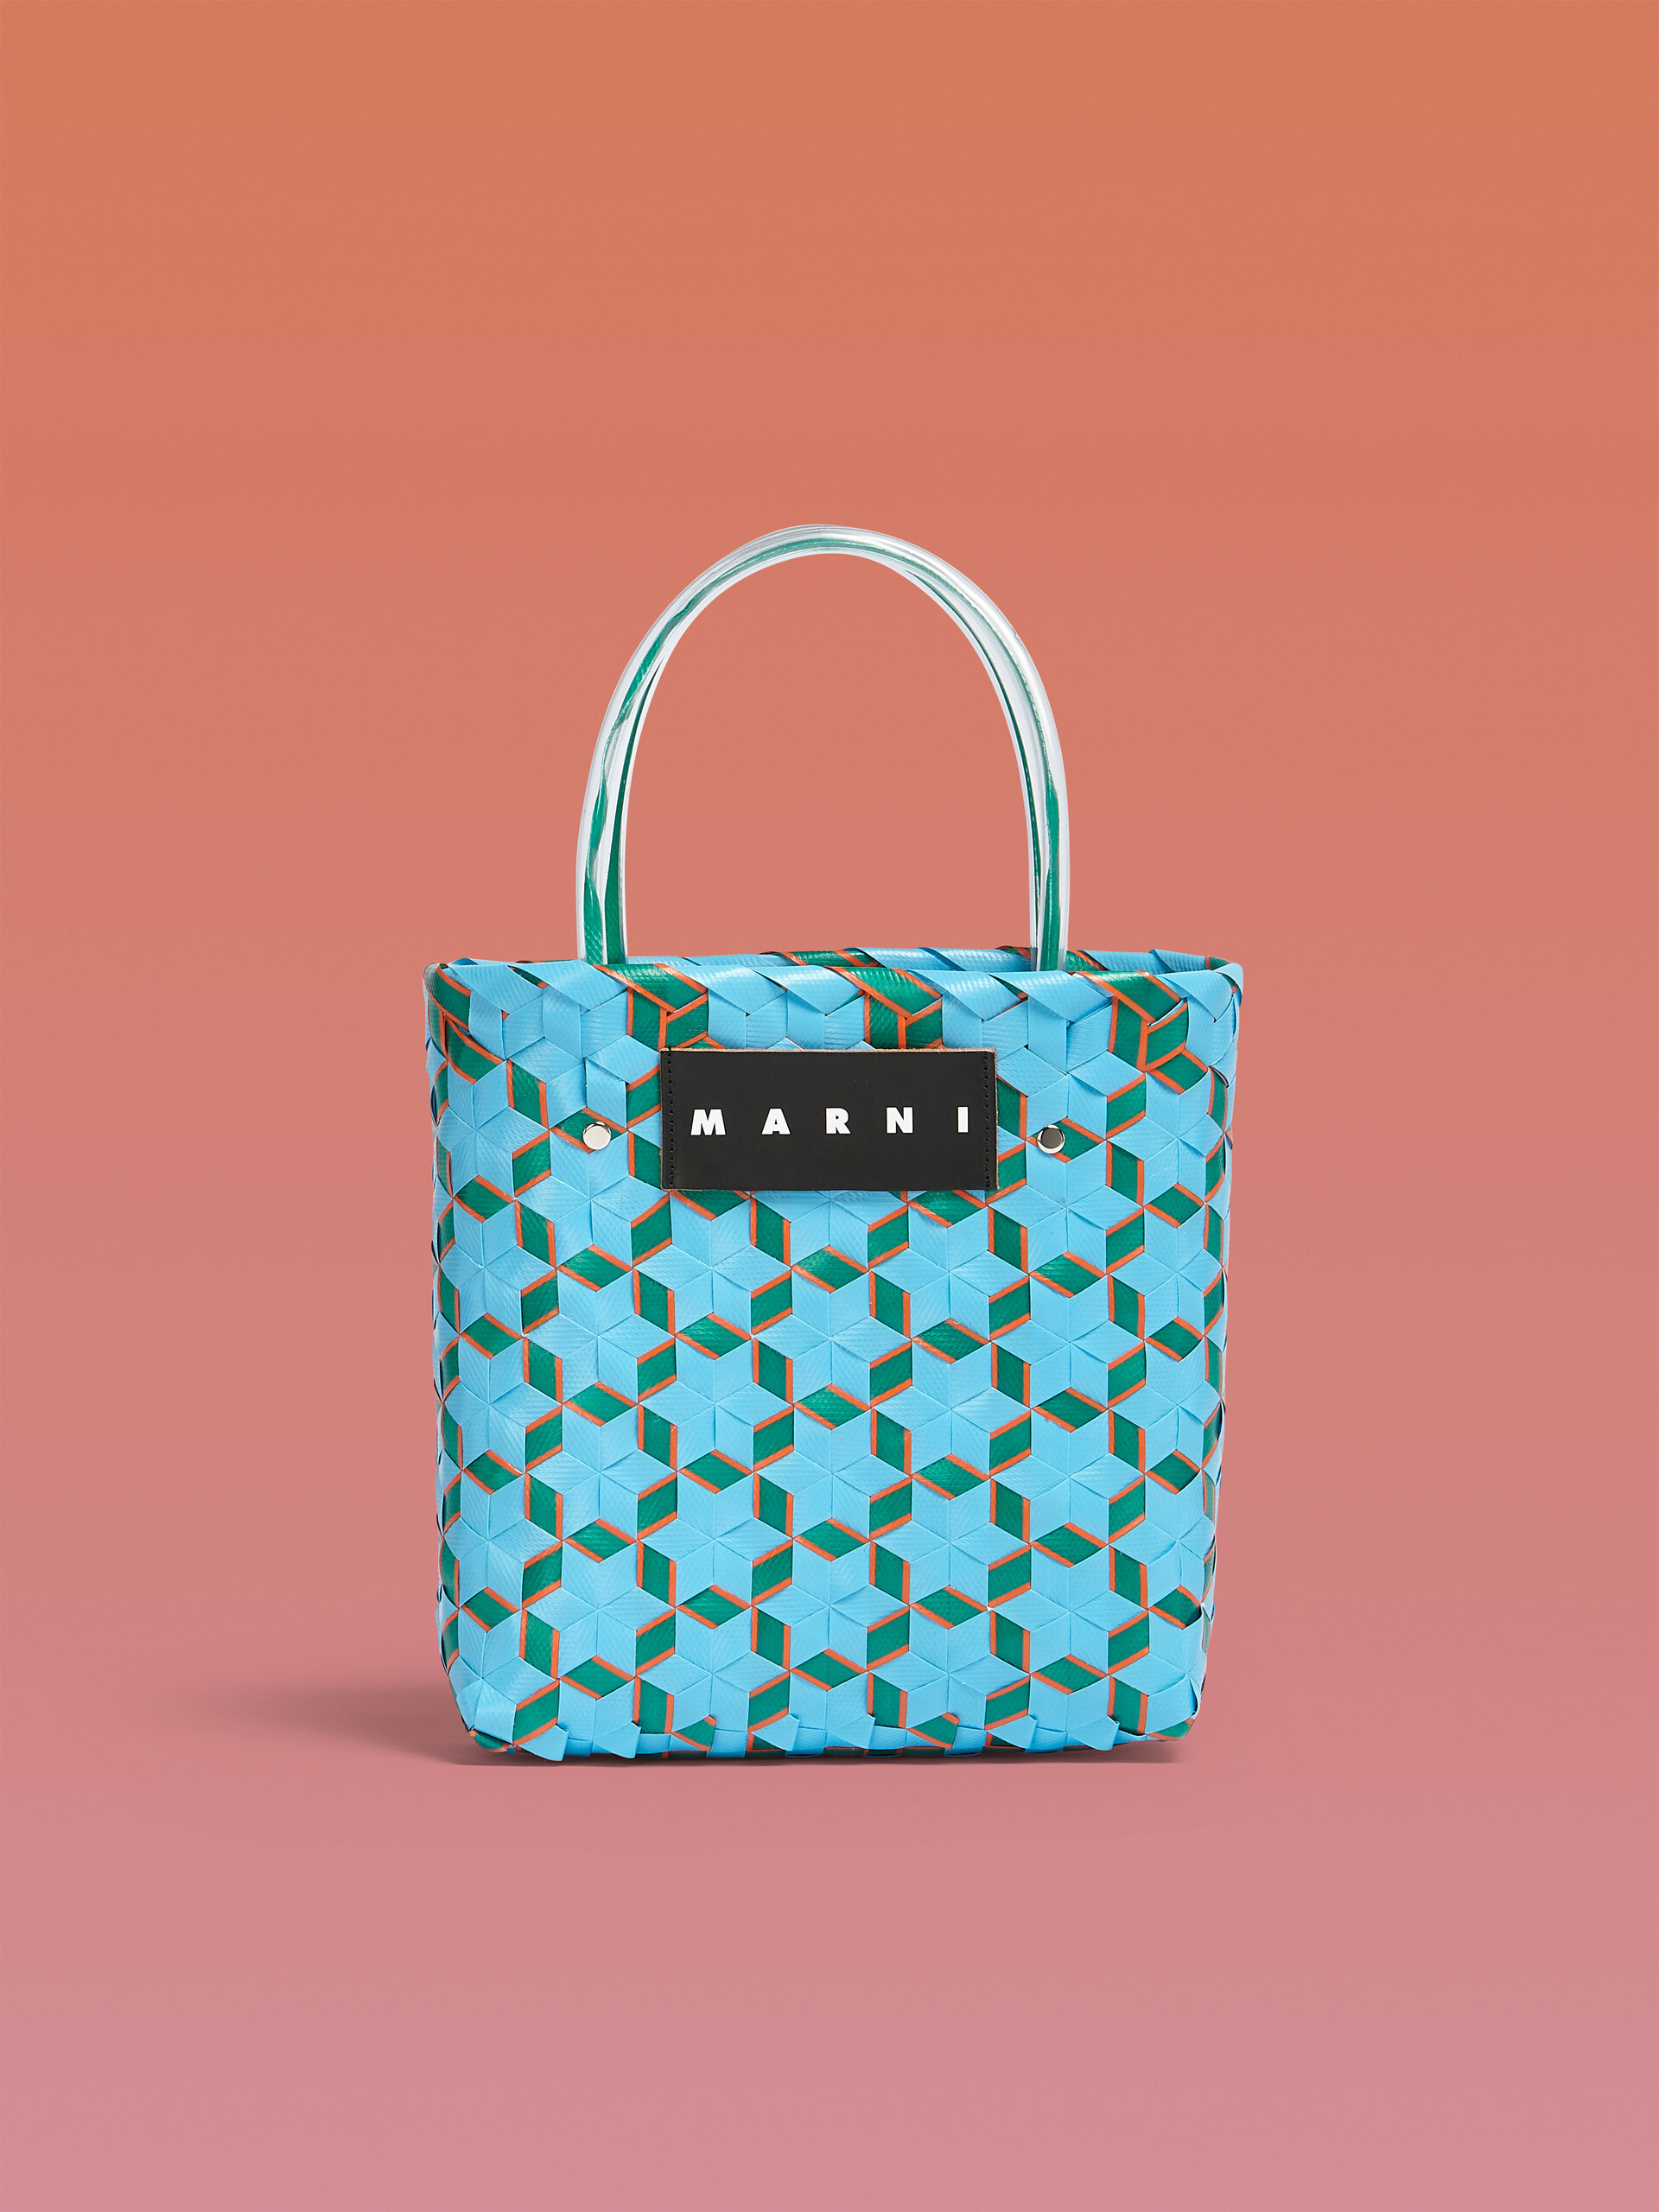 MARNI MARKET GALAXY bag in pale blue star woven material